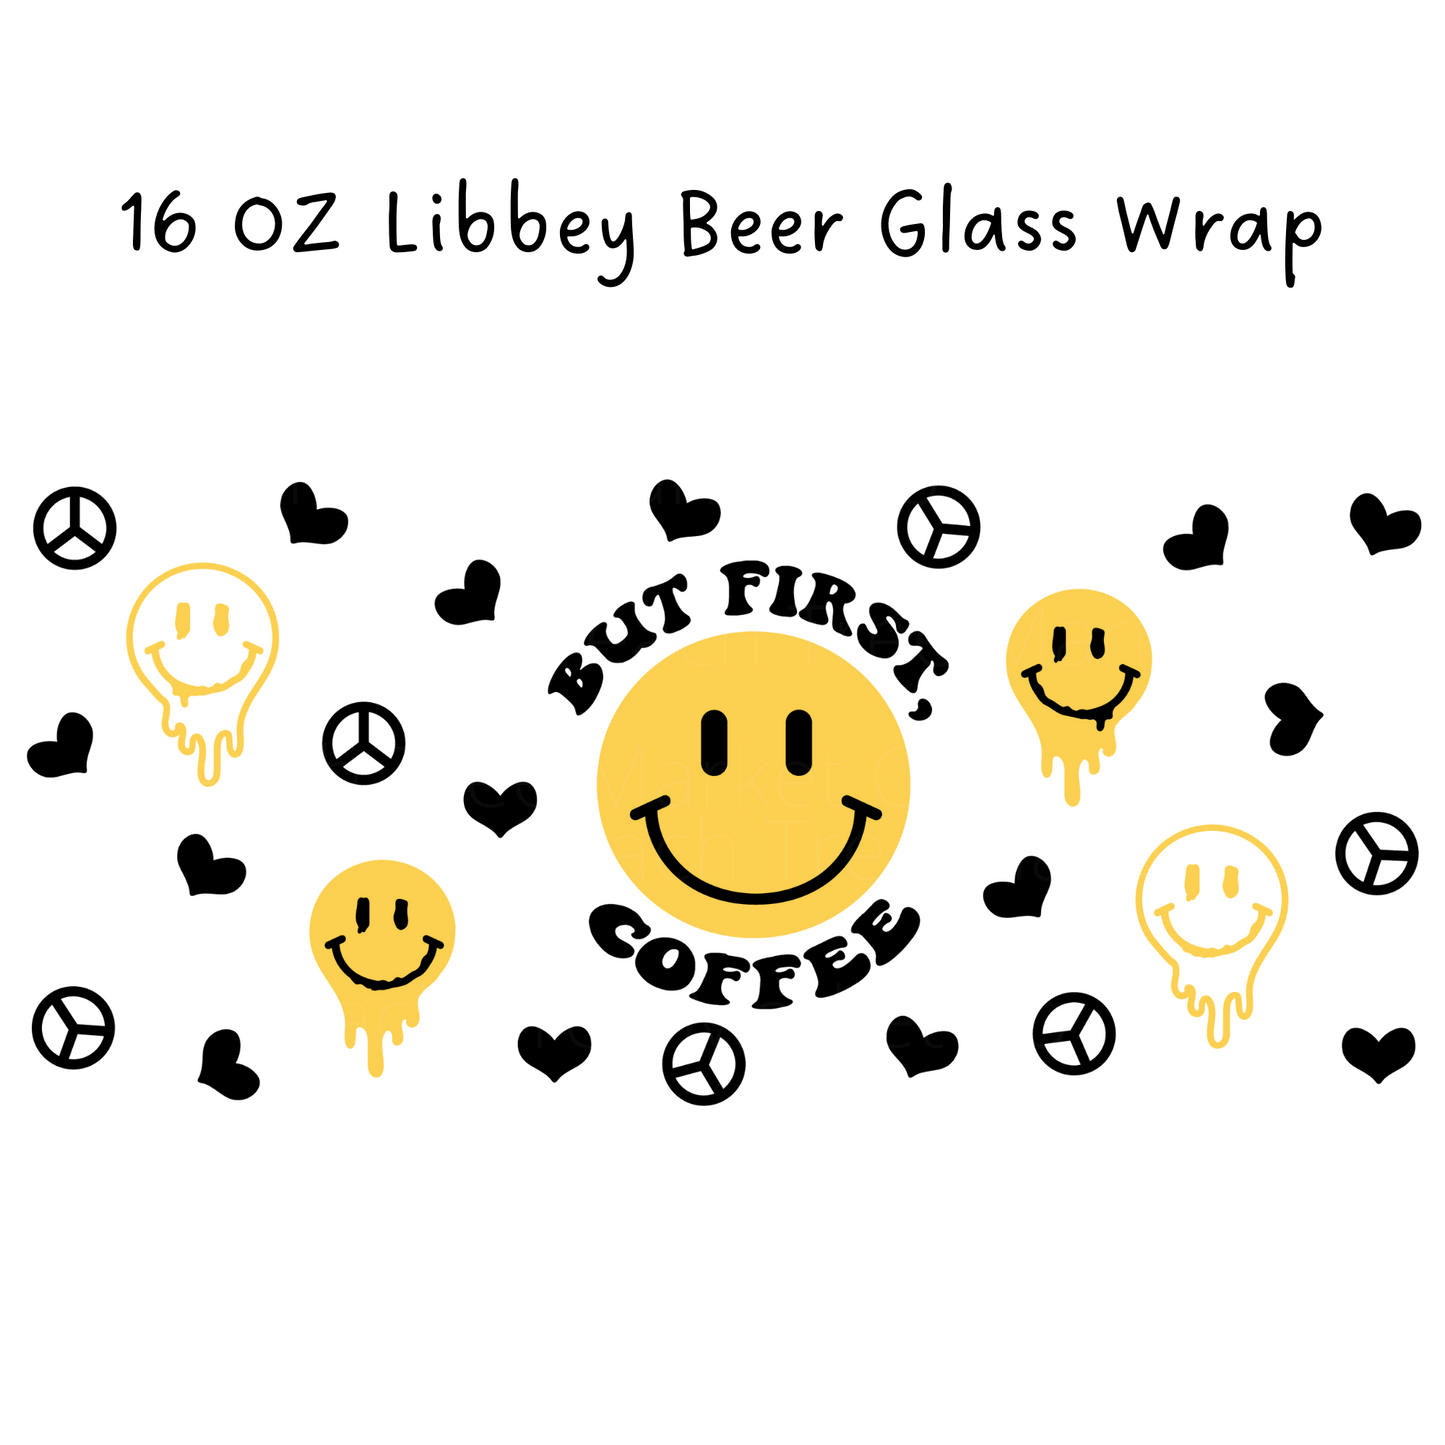 But First Coffee 16 Oz Libbey Beer Glass Wrap